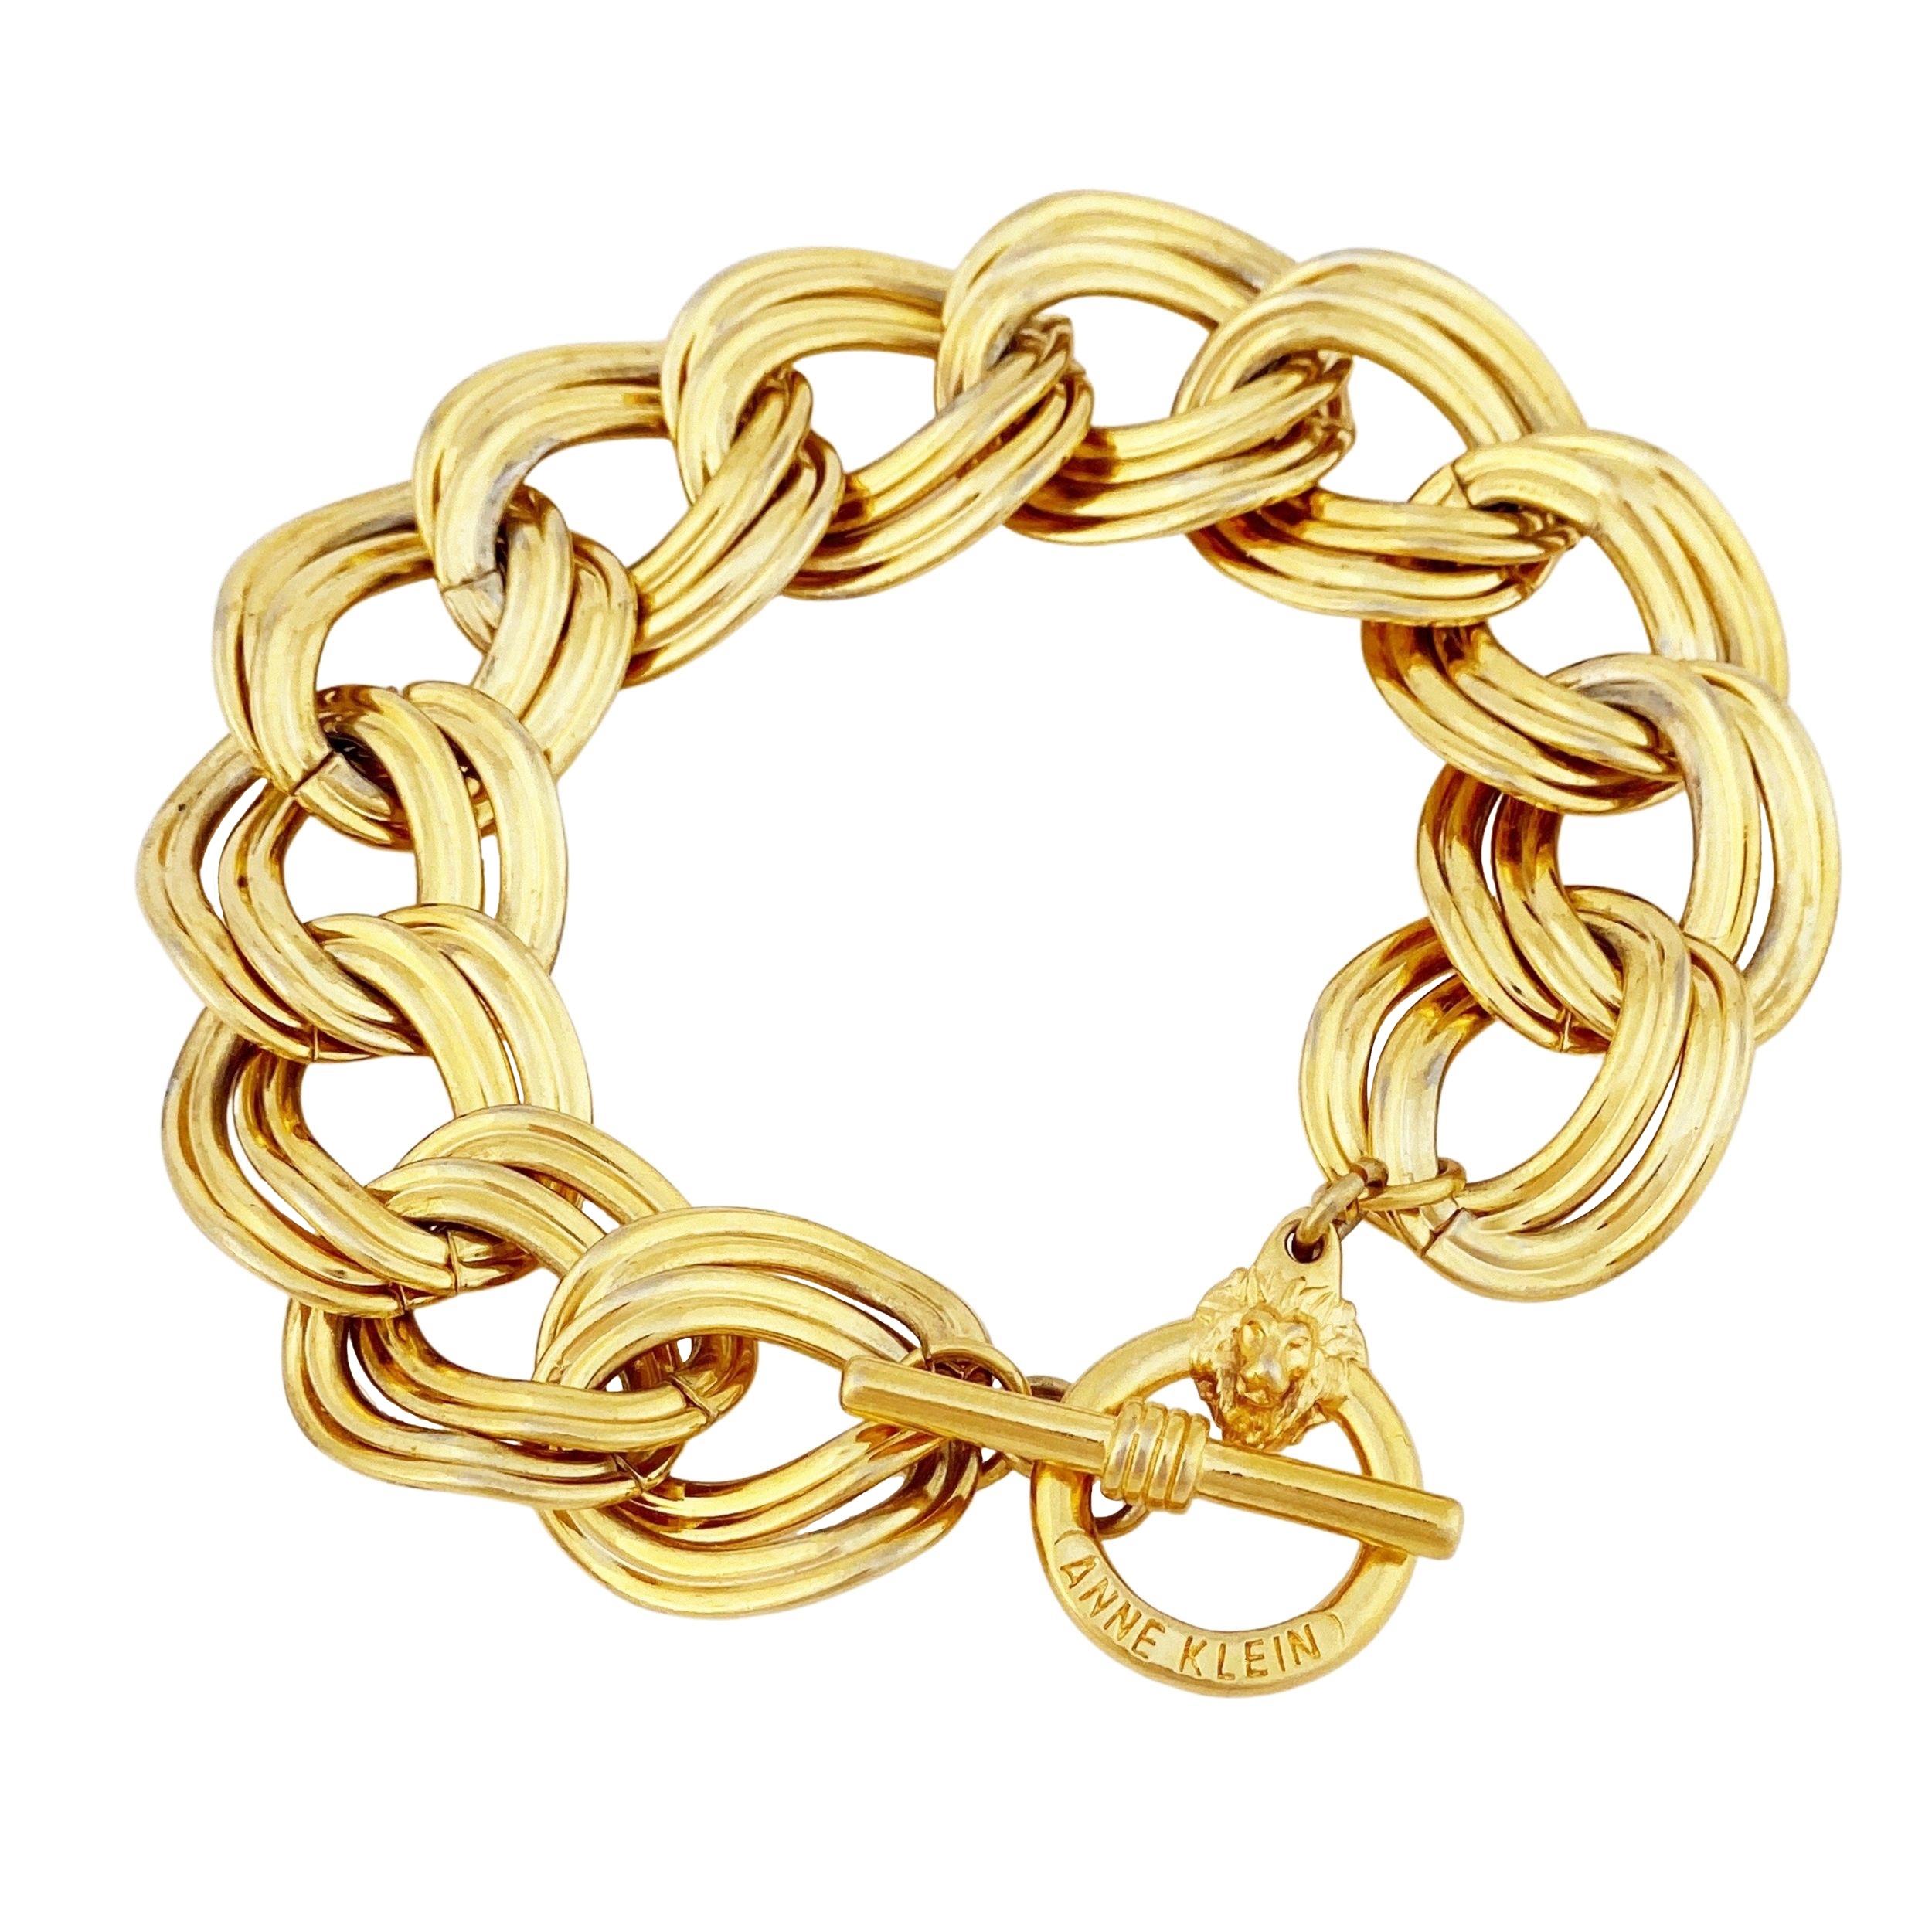 Gold Oval Link Chain Bracelet With Lion Clasp By Anne Klein, 1980s